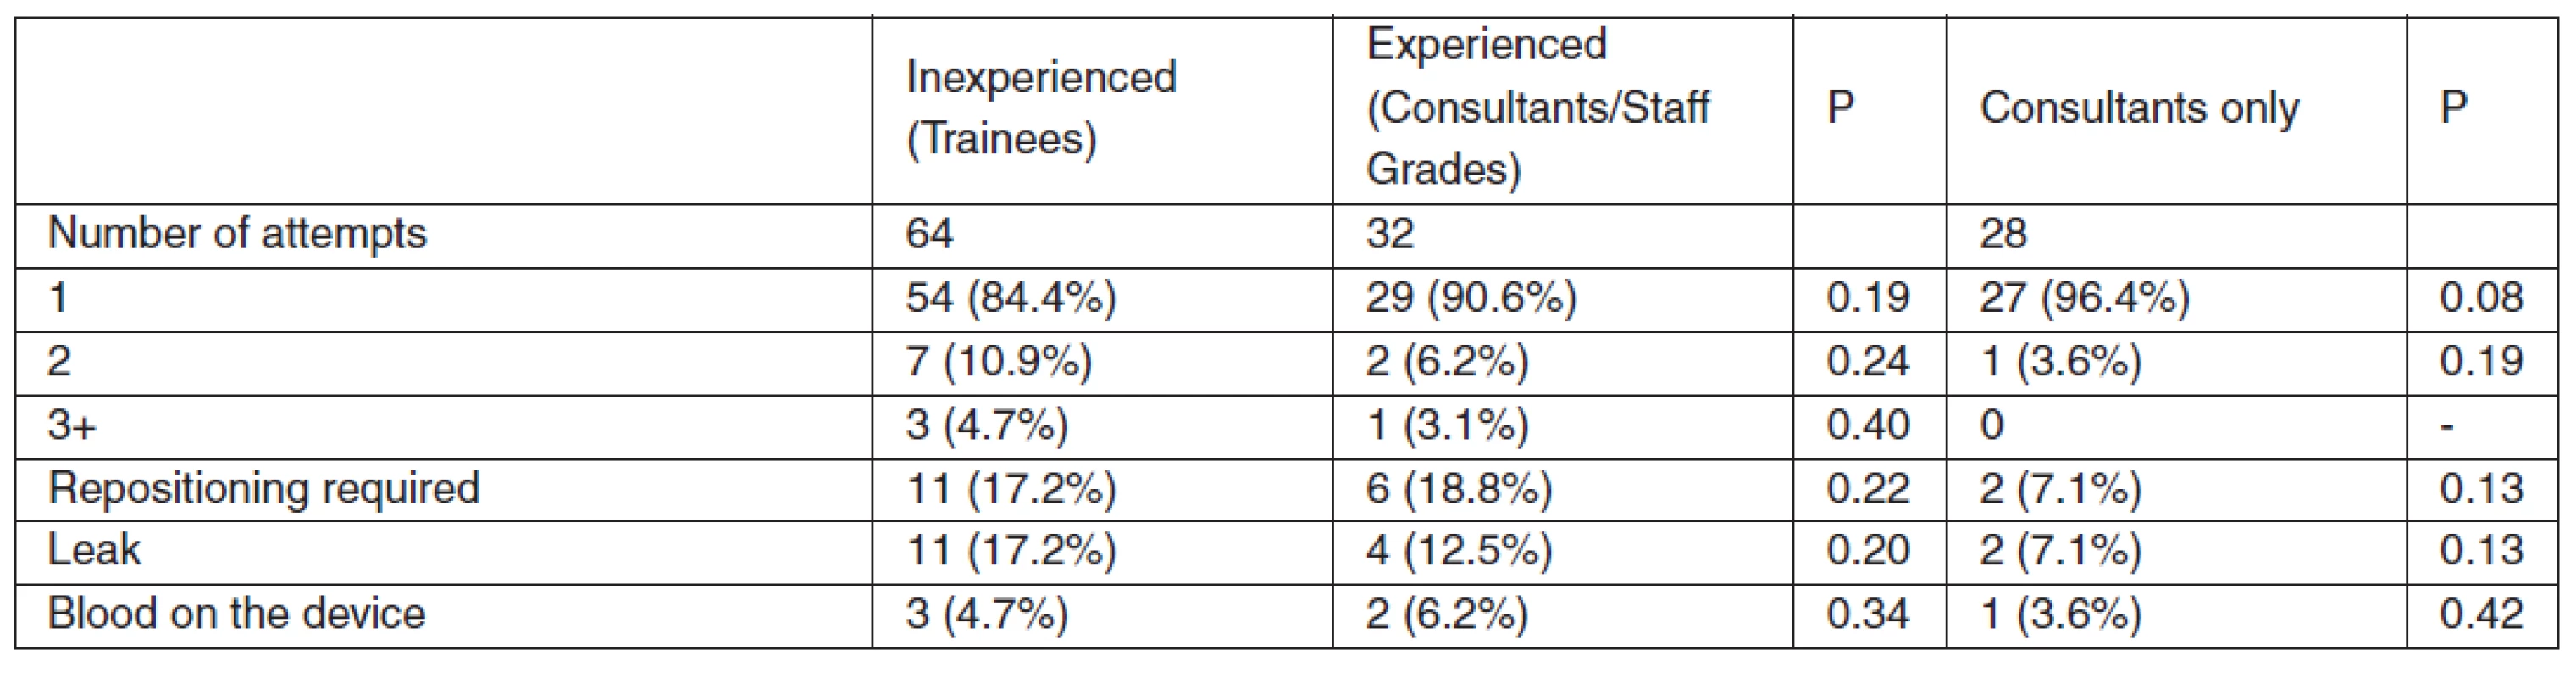 Insertion attempts, leak and traumatic insertion: comparison between inexperienced and experienced operators